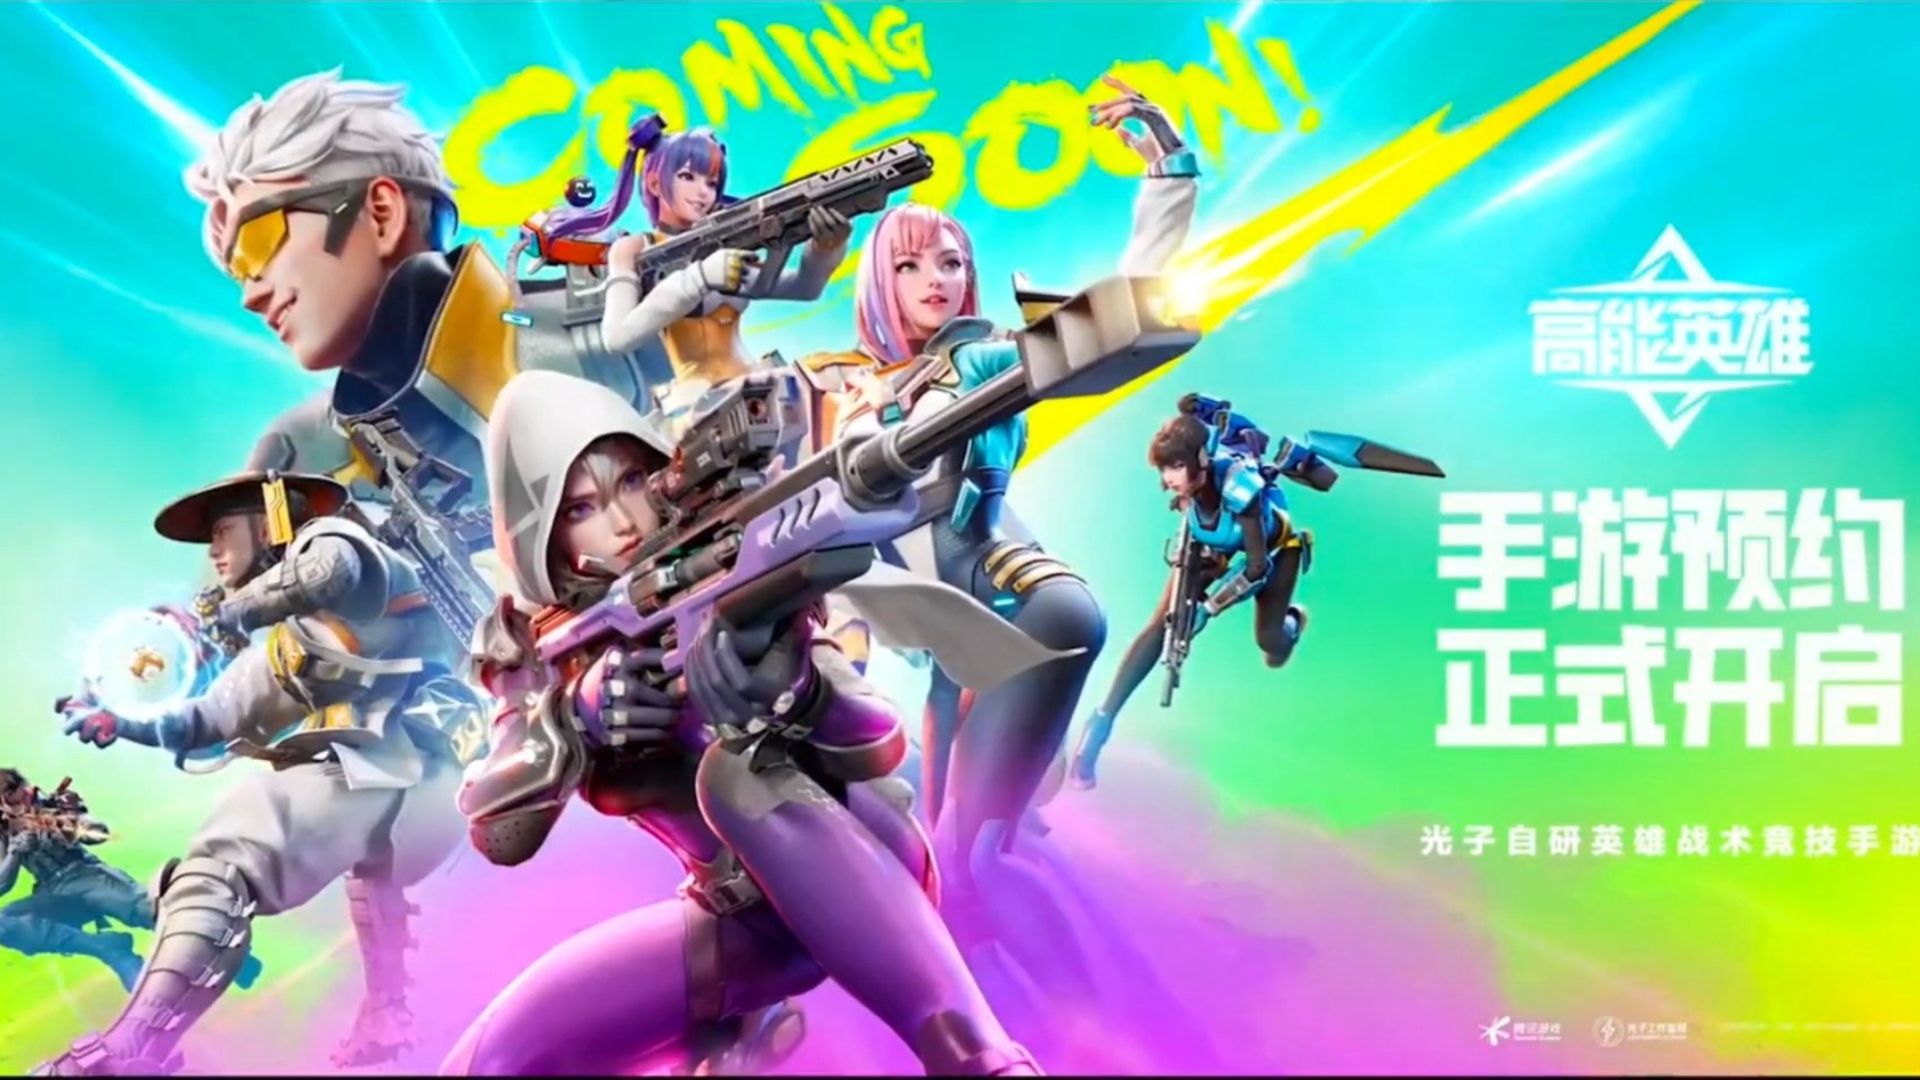 APEX LEGENDS MOBILE IS COMING BACK! (APEX MOBILE 2.0) 